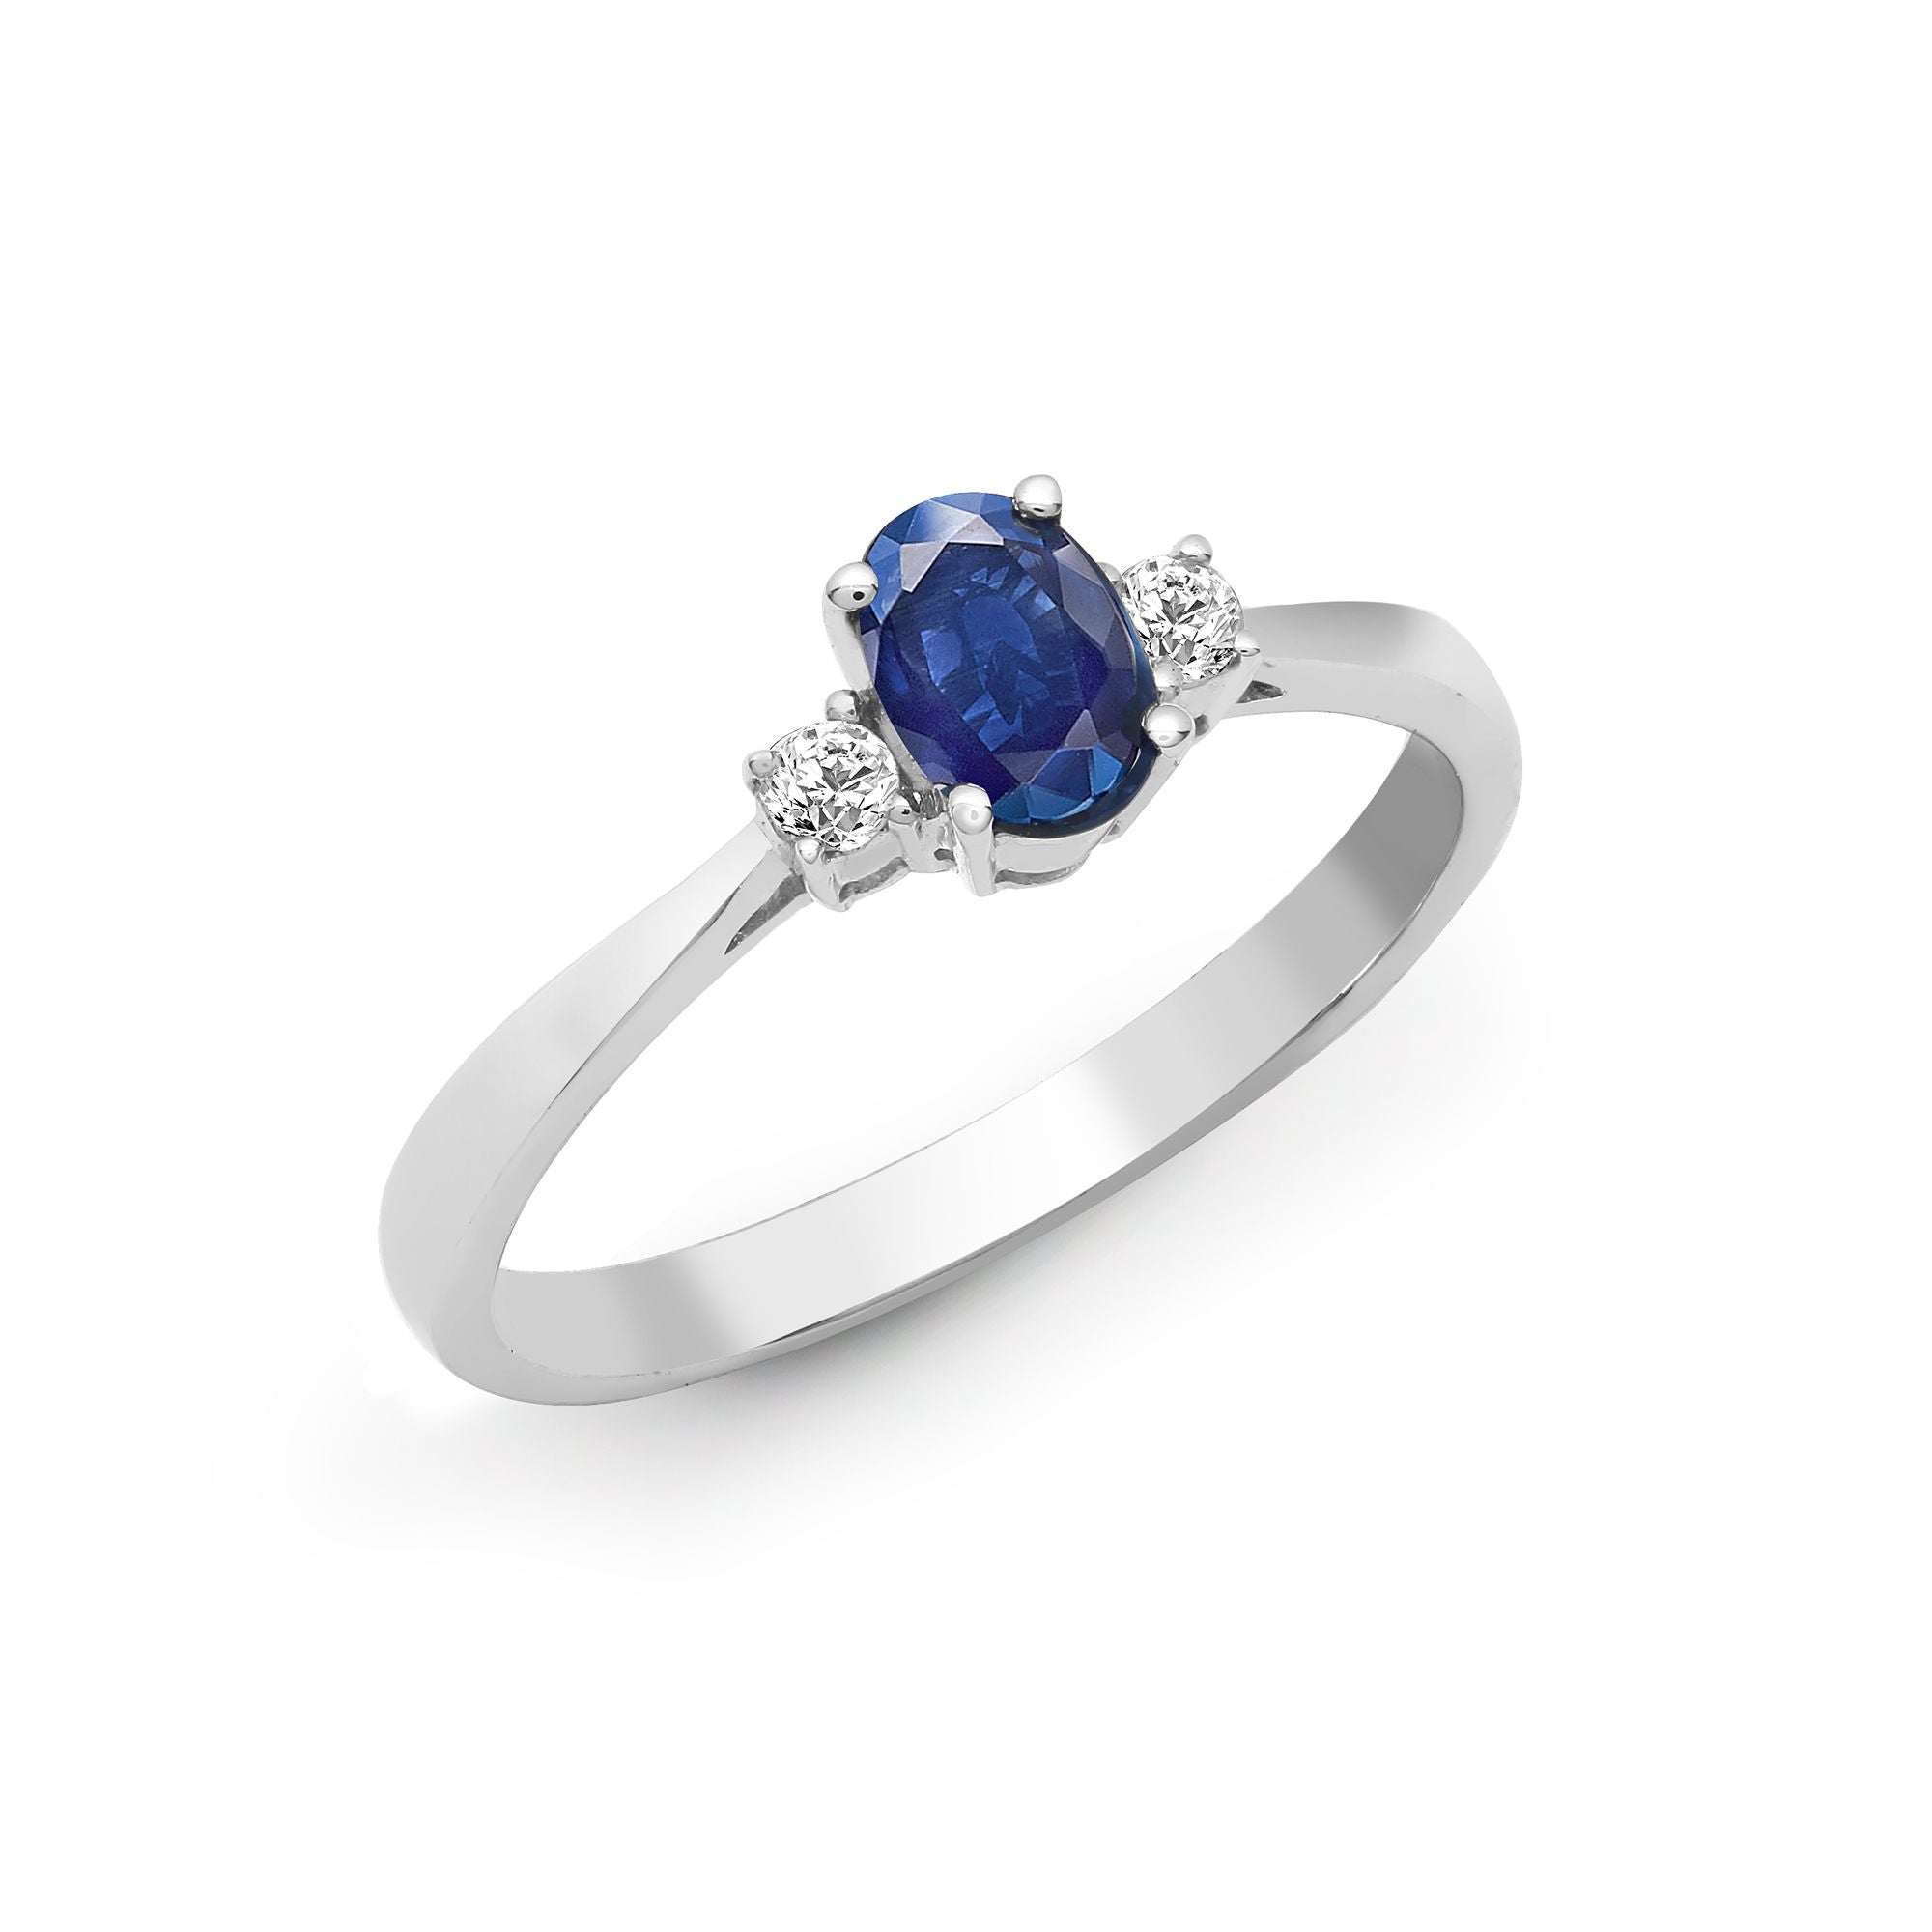 18R629-O | 18ct White Gold Diamond And Sapphire 3 Stone Ring